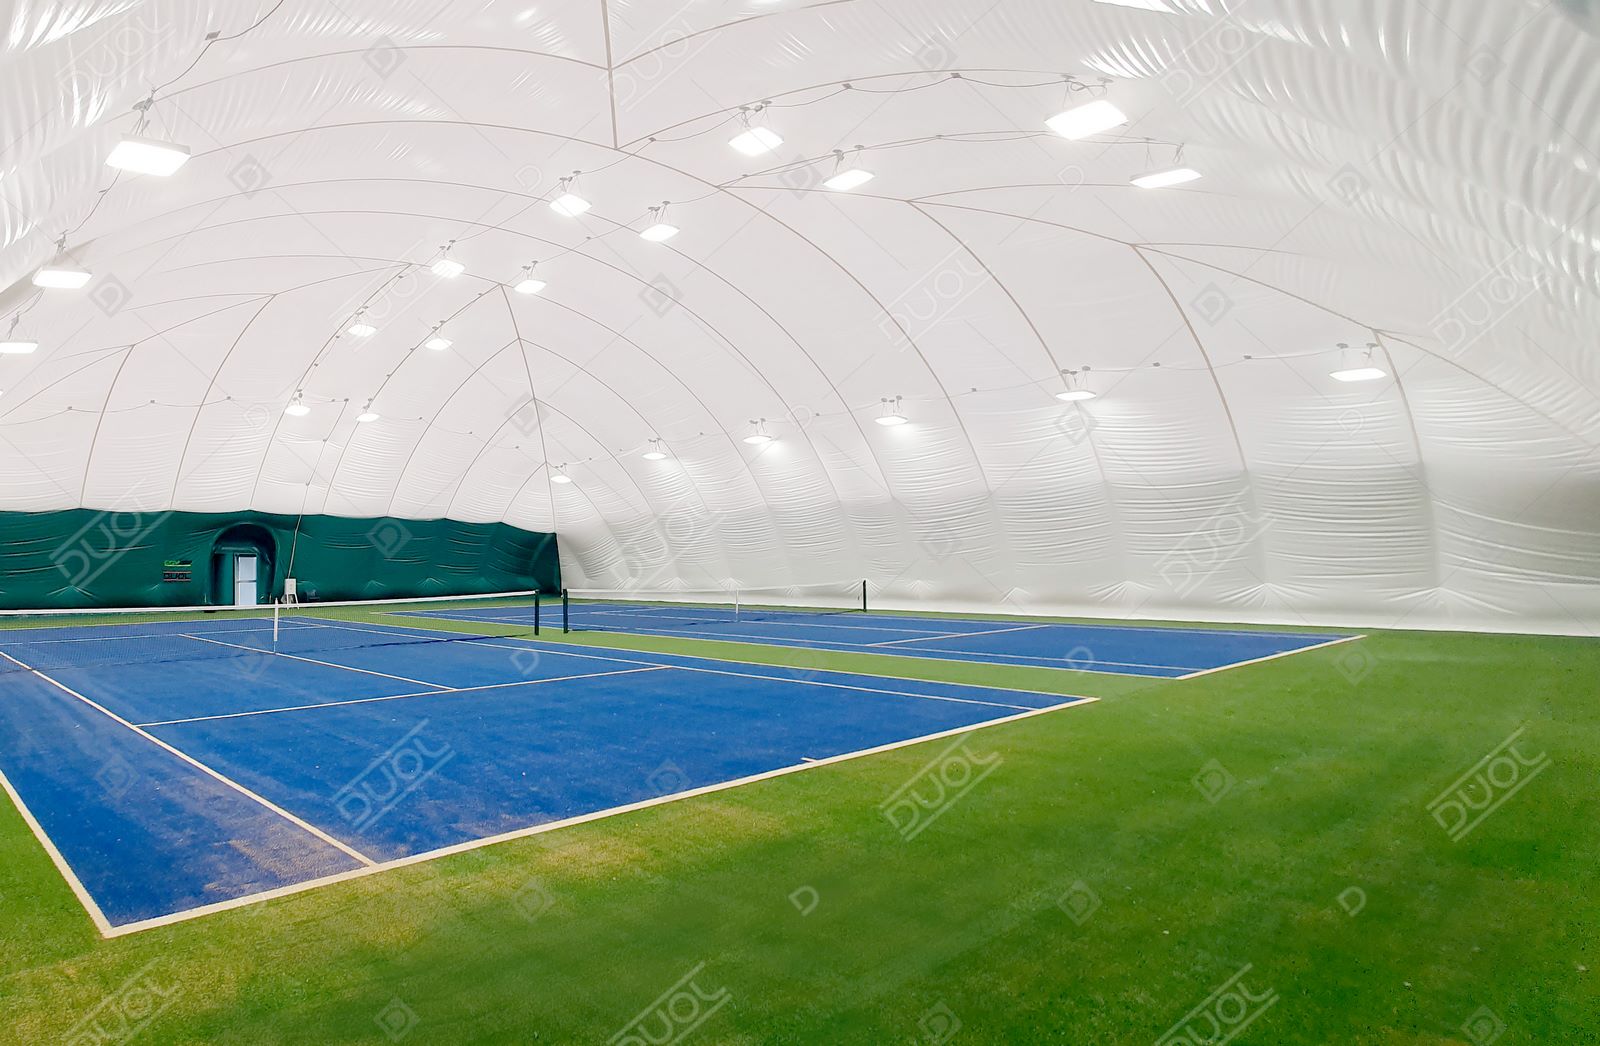 We are delighted to announce the first tennis airdome in Scotland.